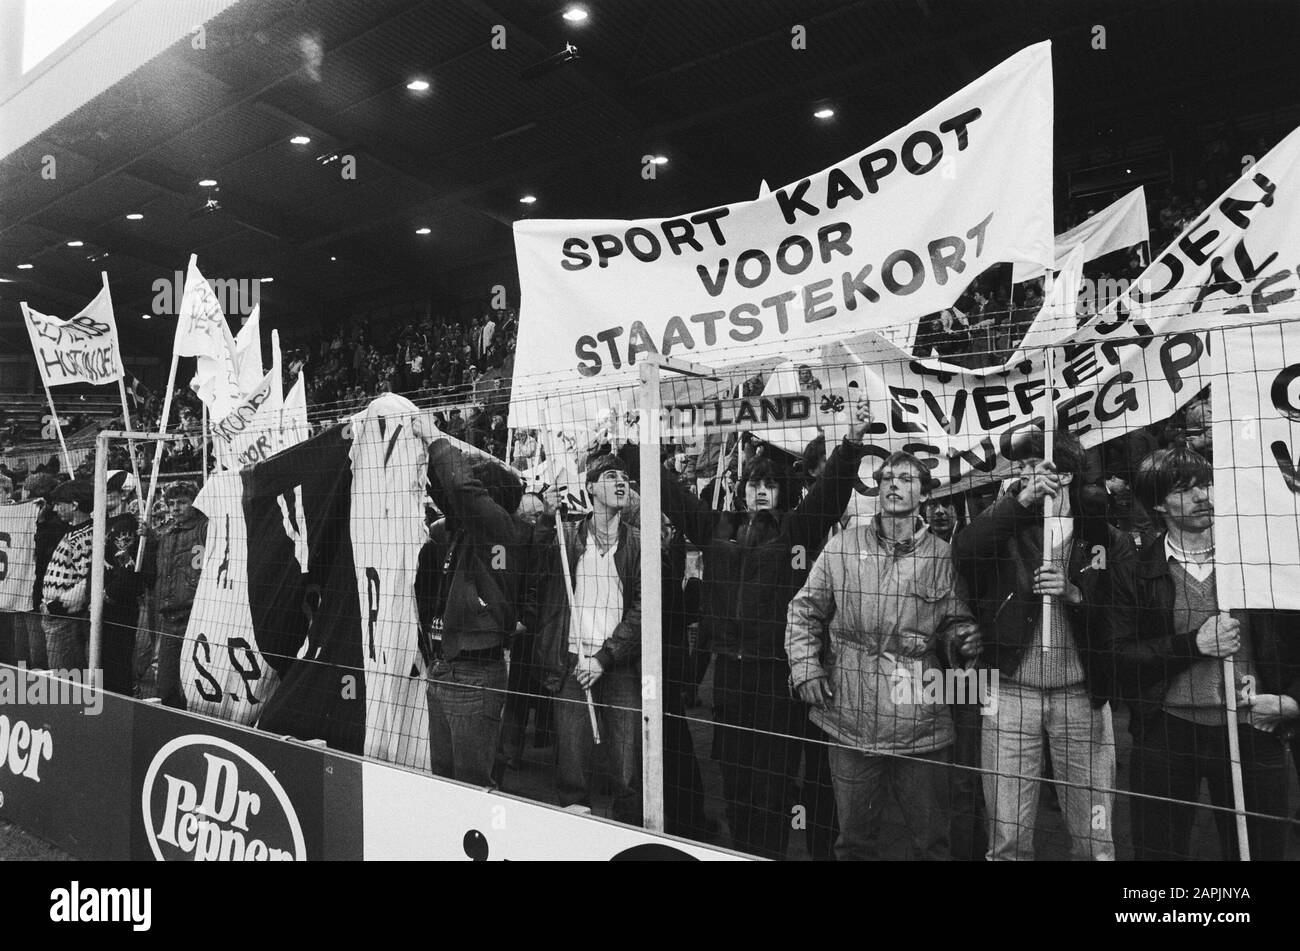 Demonstration during football Netherlands against Greece in PSV stadium against plan CRM to charge football clubs corporation tax Date: 14 April 1982 Location: Greece, Netherlands Keywords: Demonstration, sport, football Stock Photo